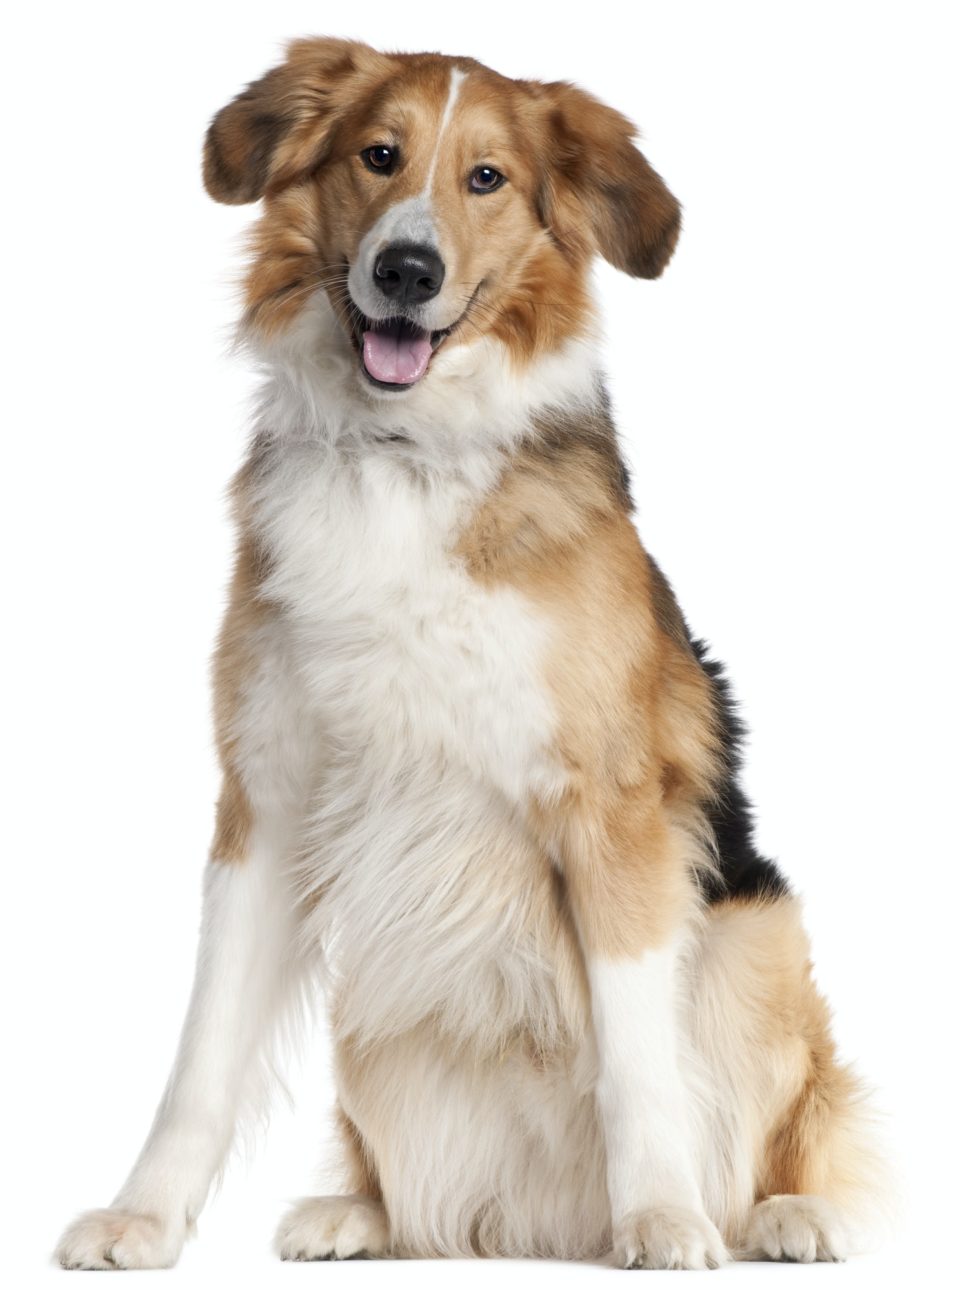 Mixed-breed dog, 2 and a half years old, sitting in front of white background